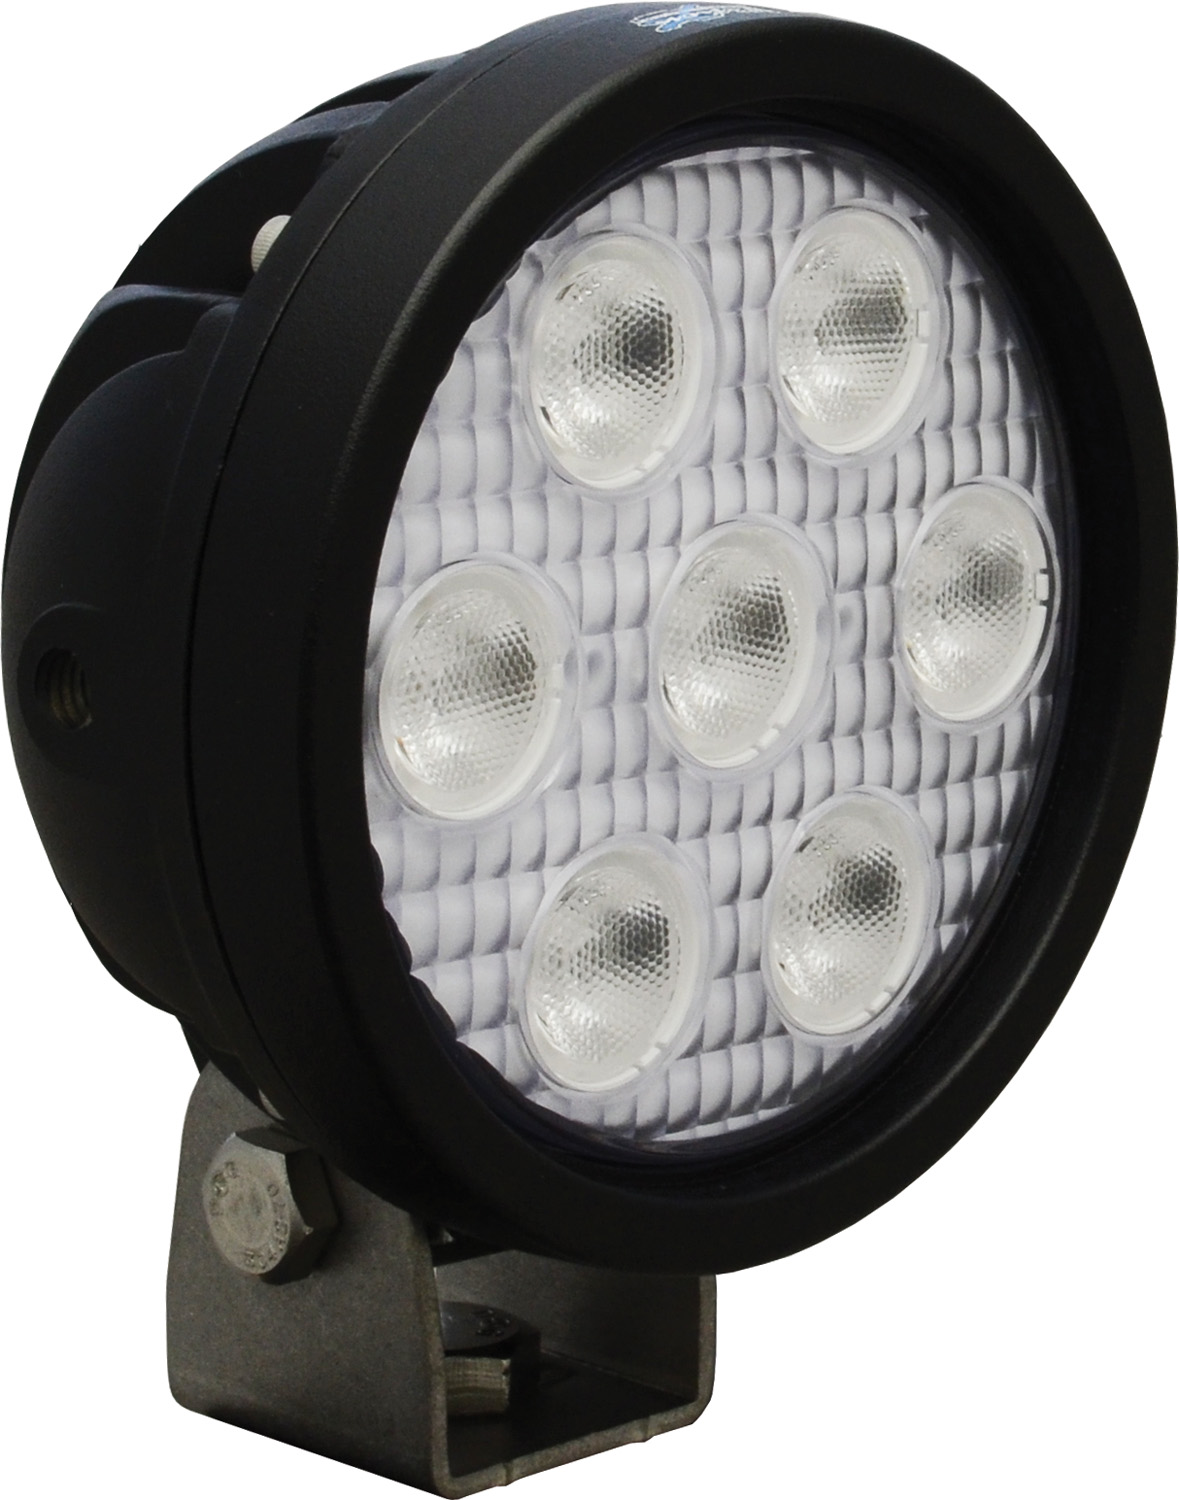 4" ROUND UTILITY MARKET BLACK 7 3W RED LED'S 40? WIDE